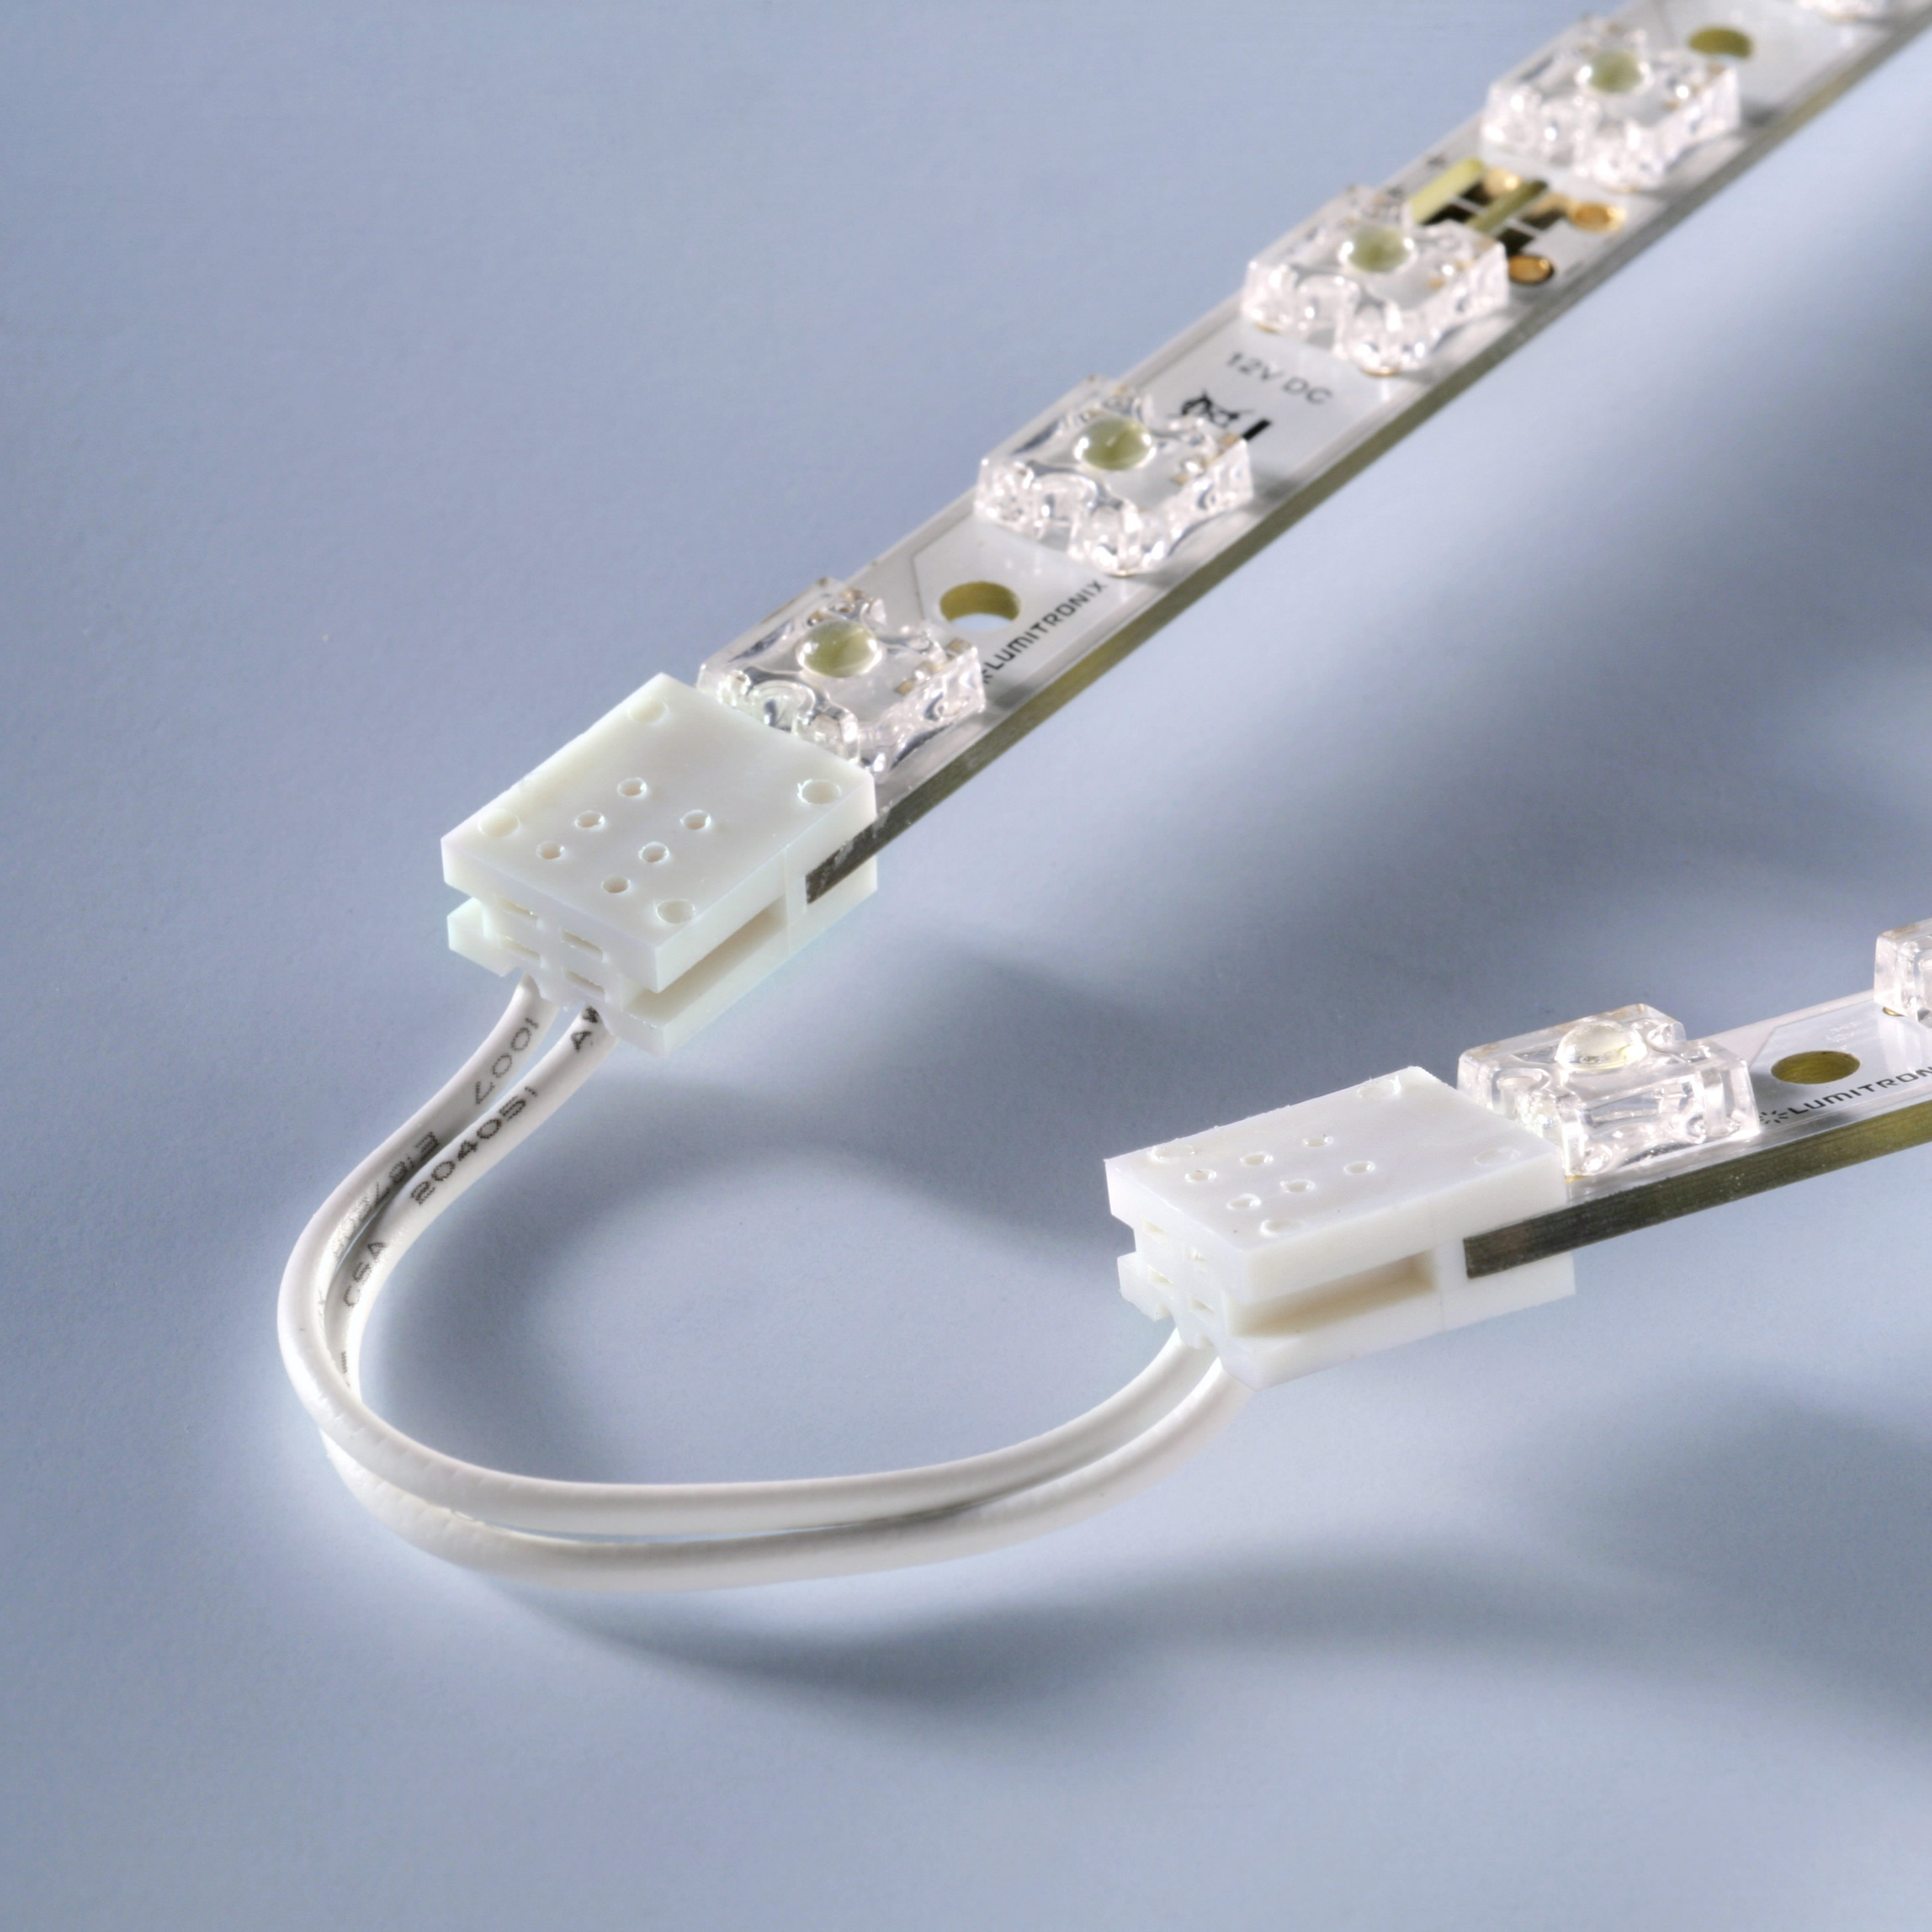 Connector with cable for LED Matrix & MultiBar length 2.36"